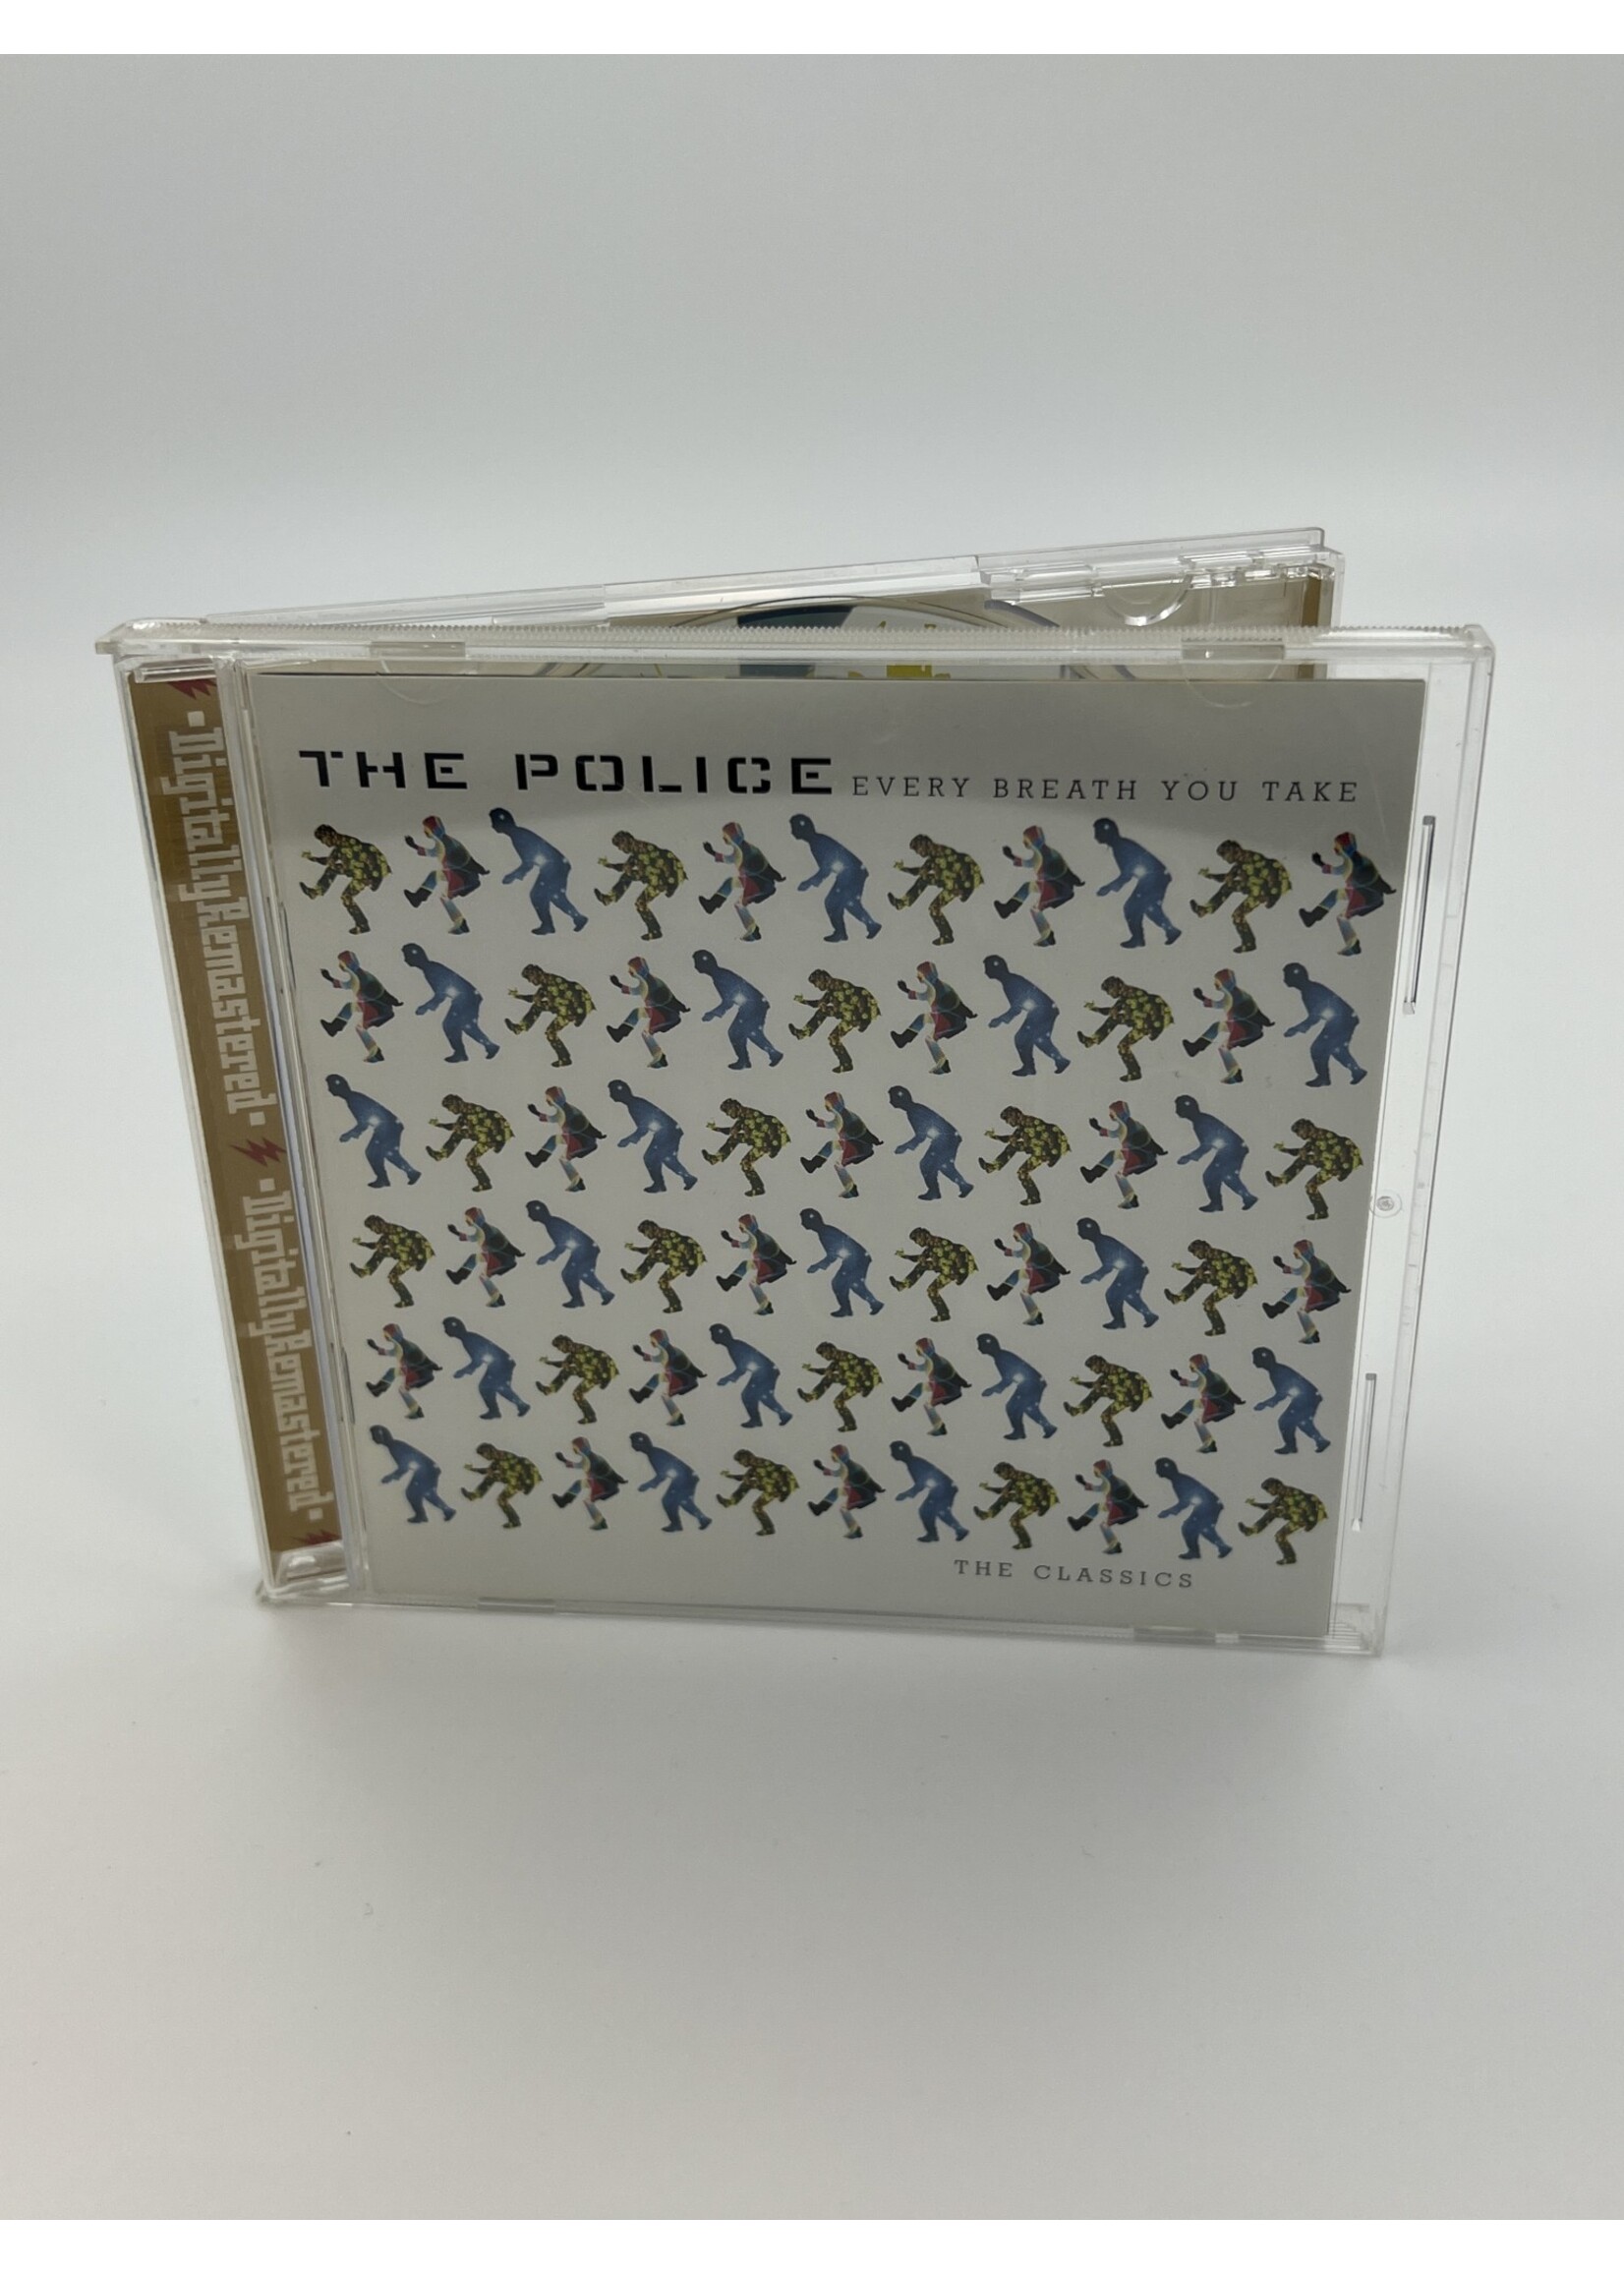 CD The Police Every Breath You Take The Classics CD